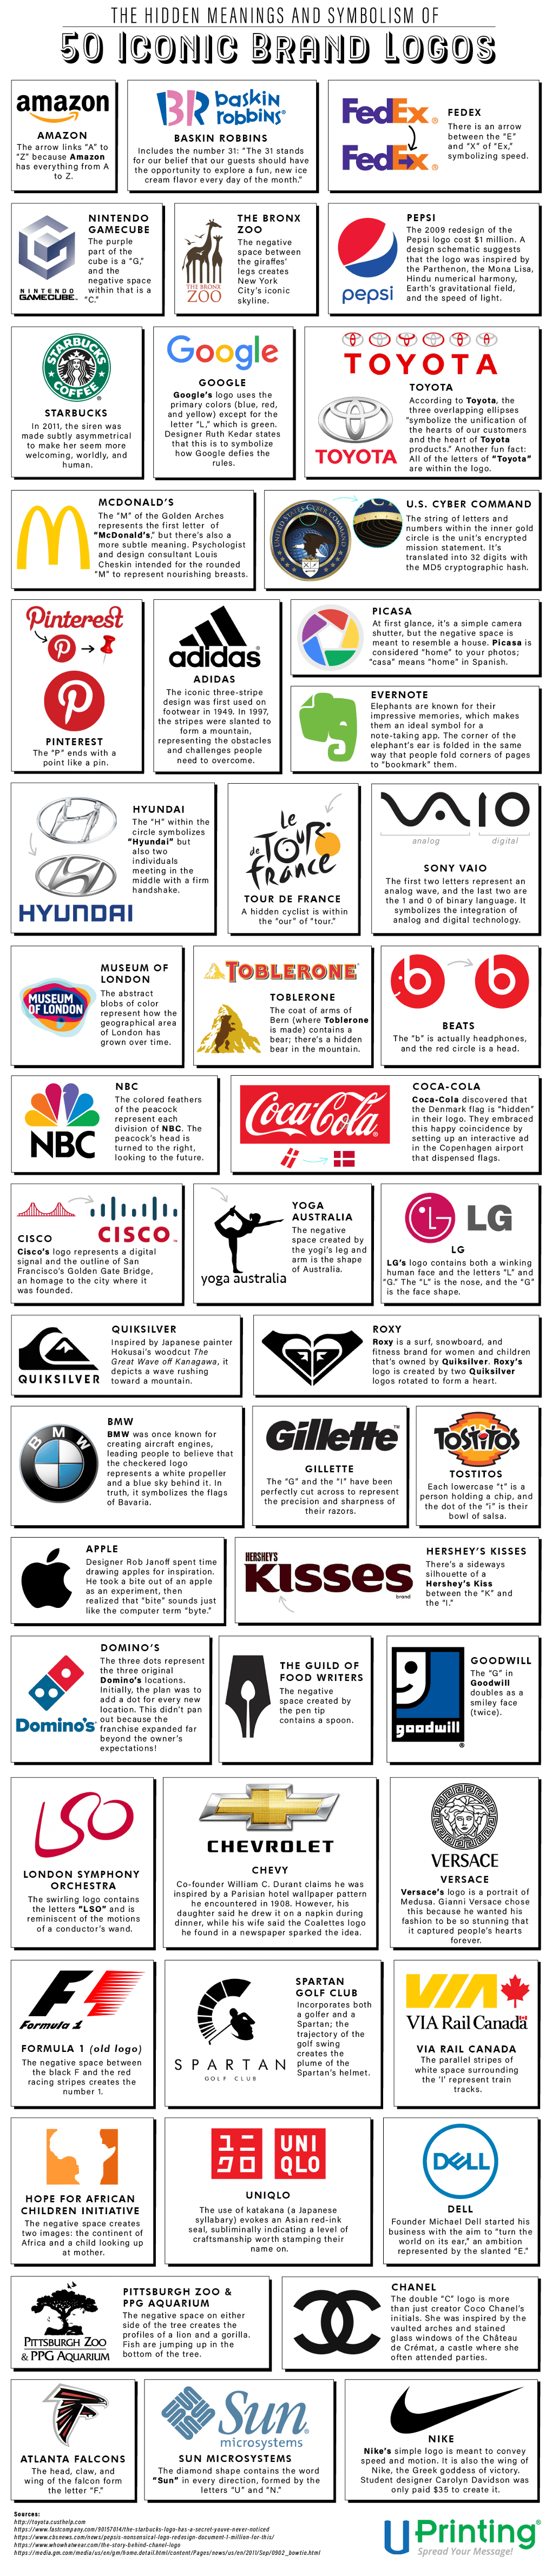 The Hidden Meanings and Symbolism of 50 Iconic Brand Logos